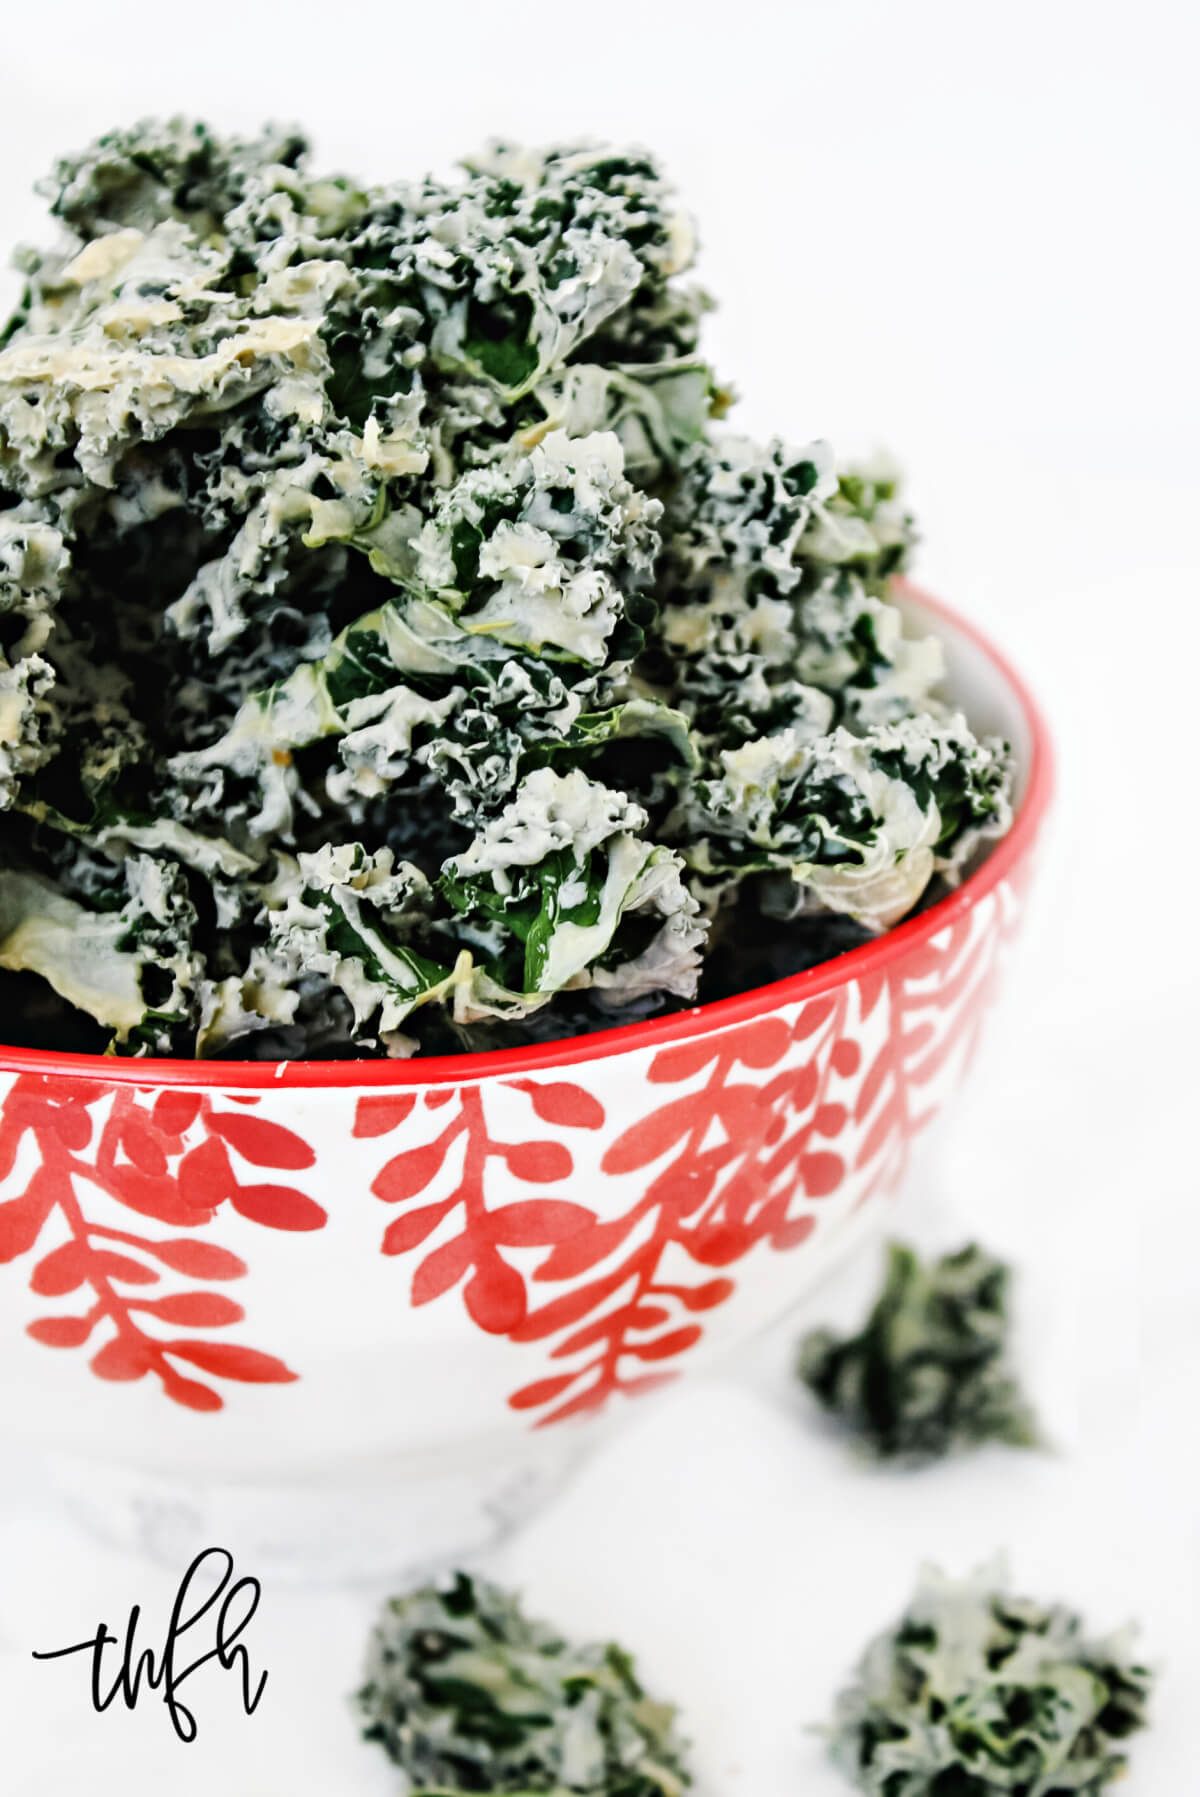 Vertical close-up image of a decorative red and white bowl filled with habanero kale chips on a solid white background